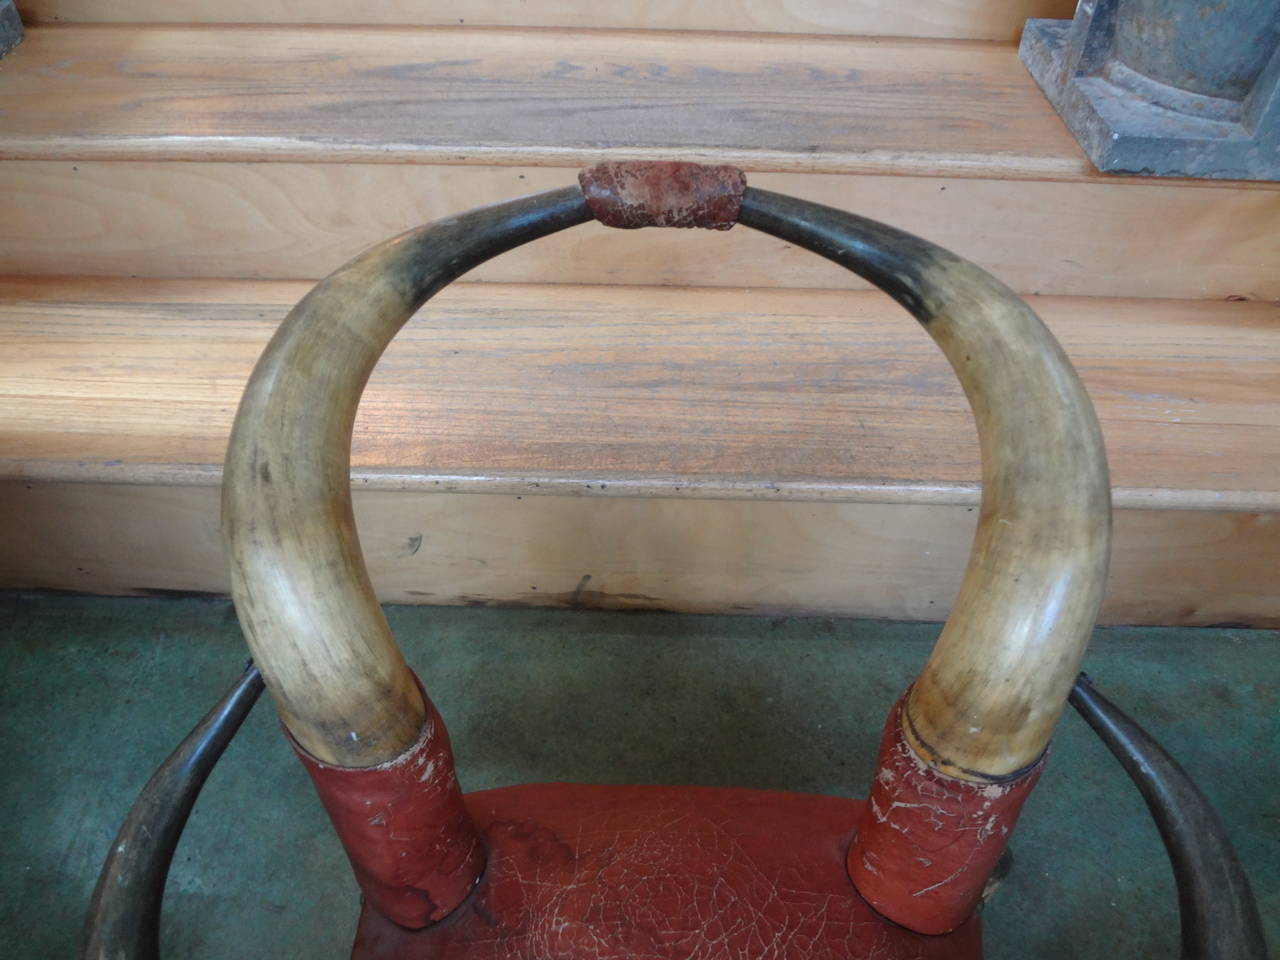 Antique children's Horn chair upholstered in leather.
Great children's chair or child's horn chair with distressed leather upholstery and brass nail head trim. This unusual antique horn chair would work well in a variety of interiors and makes a